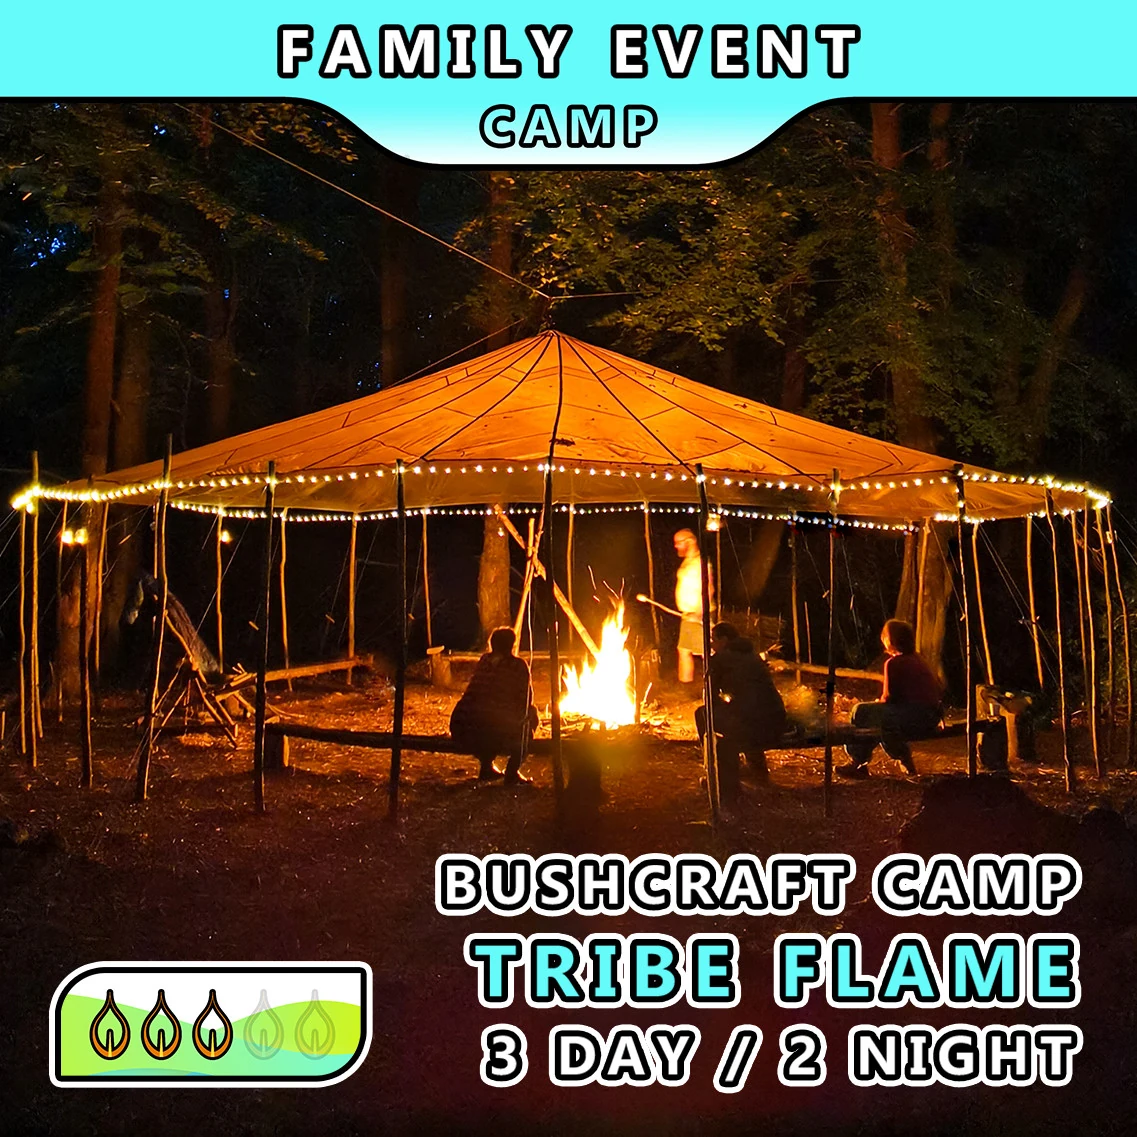 bushcraft family camp 3 day and 2 nights at TRIBE